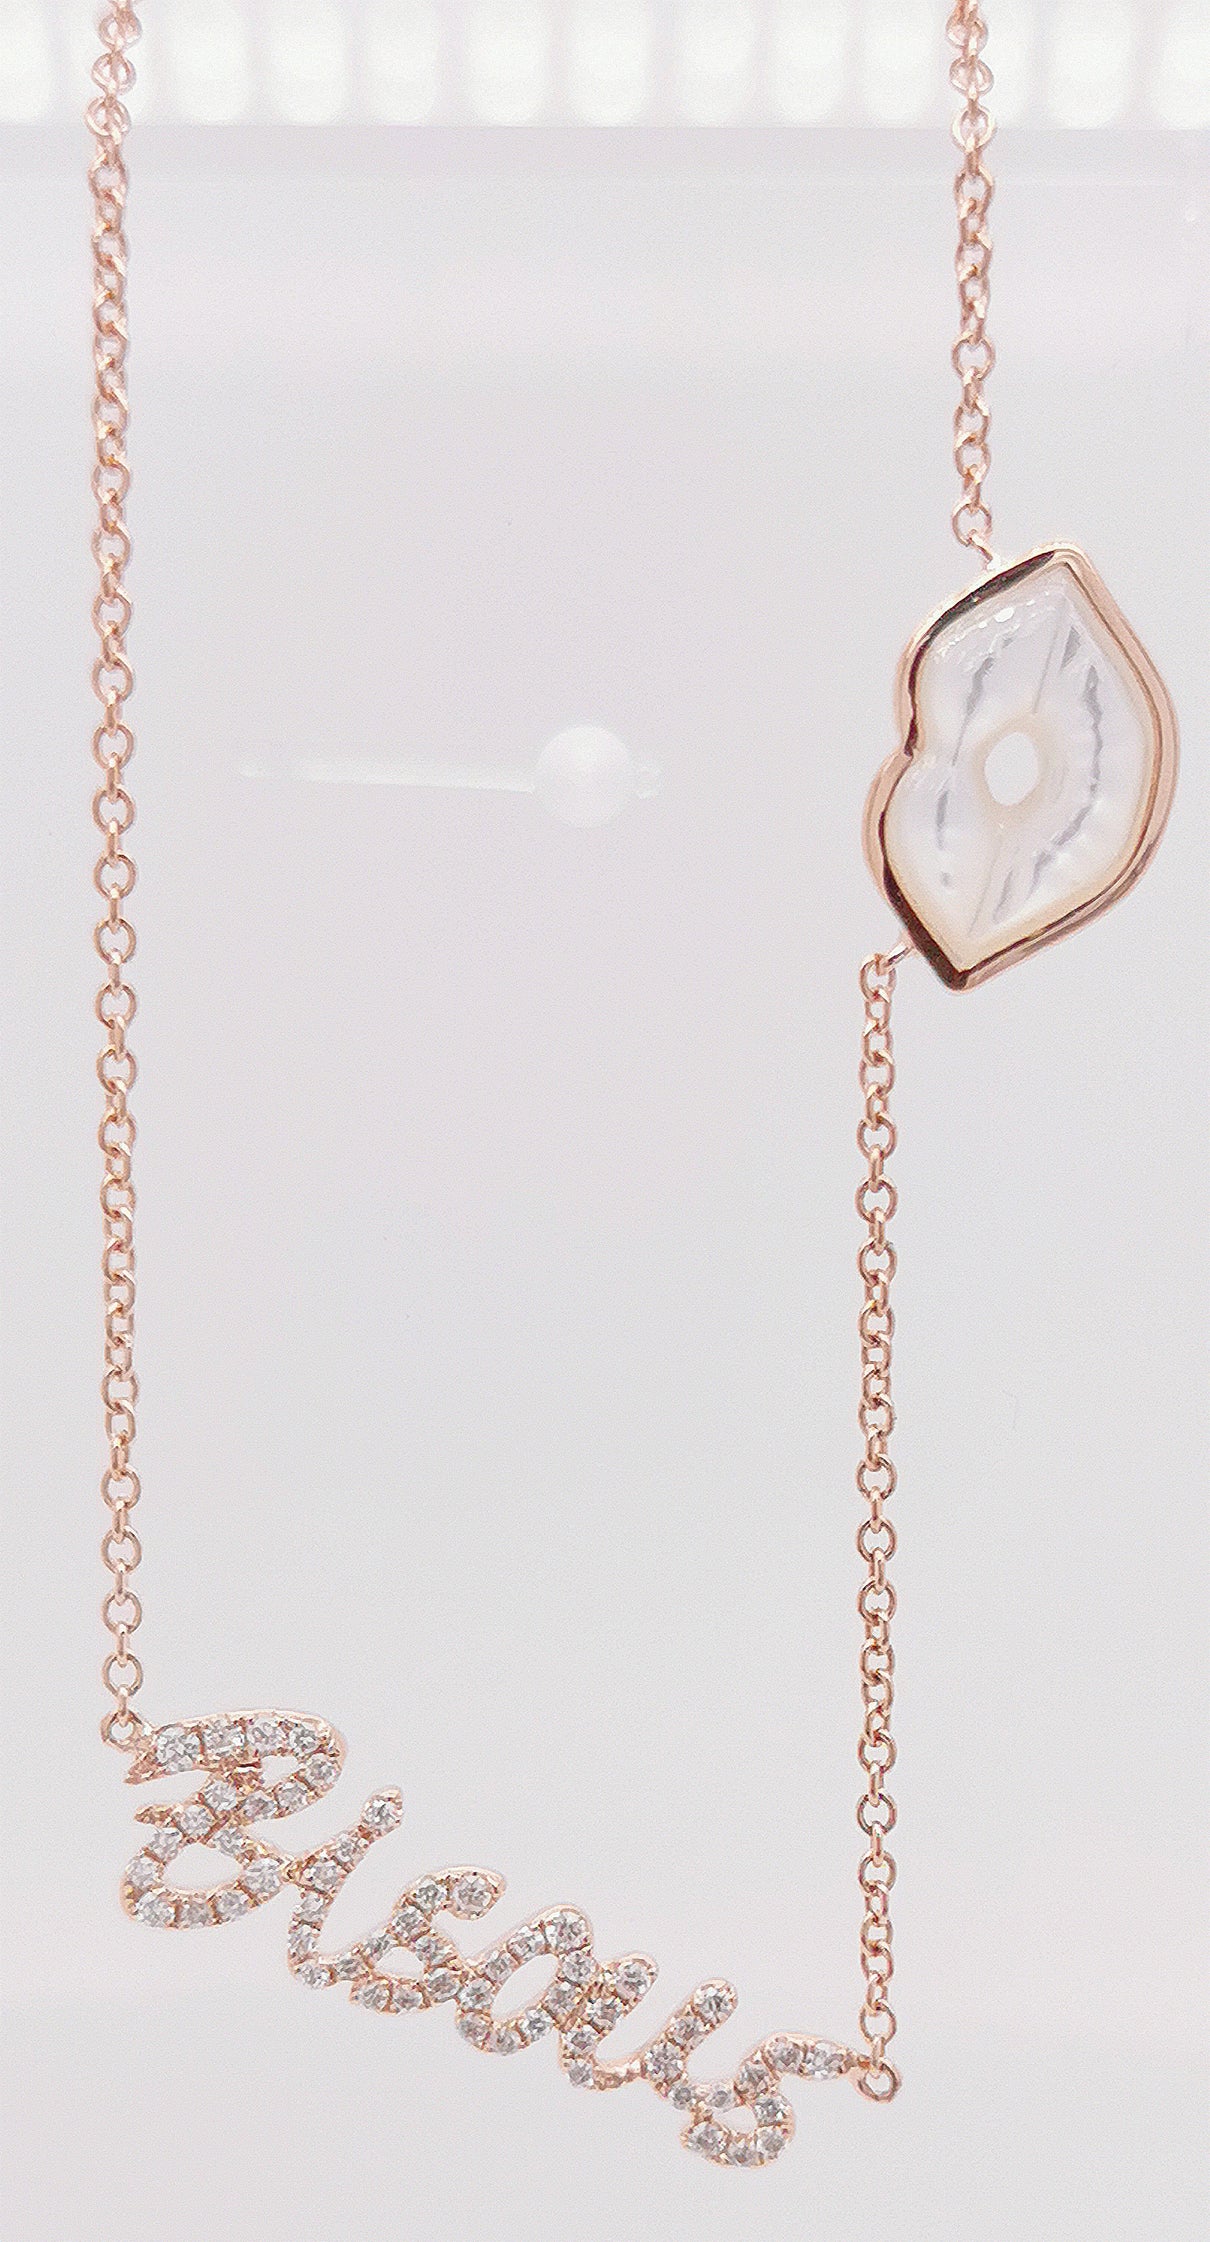 "Bisous" 18K pink gold necklace